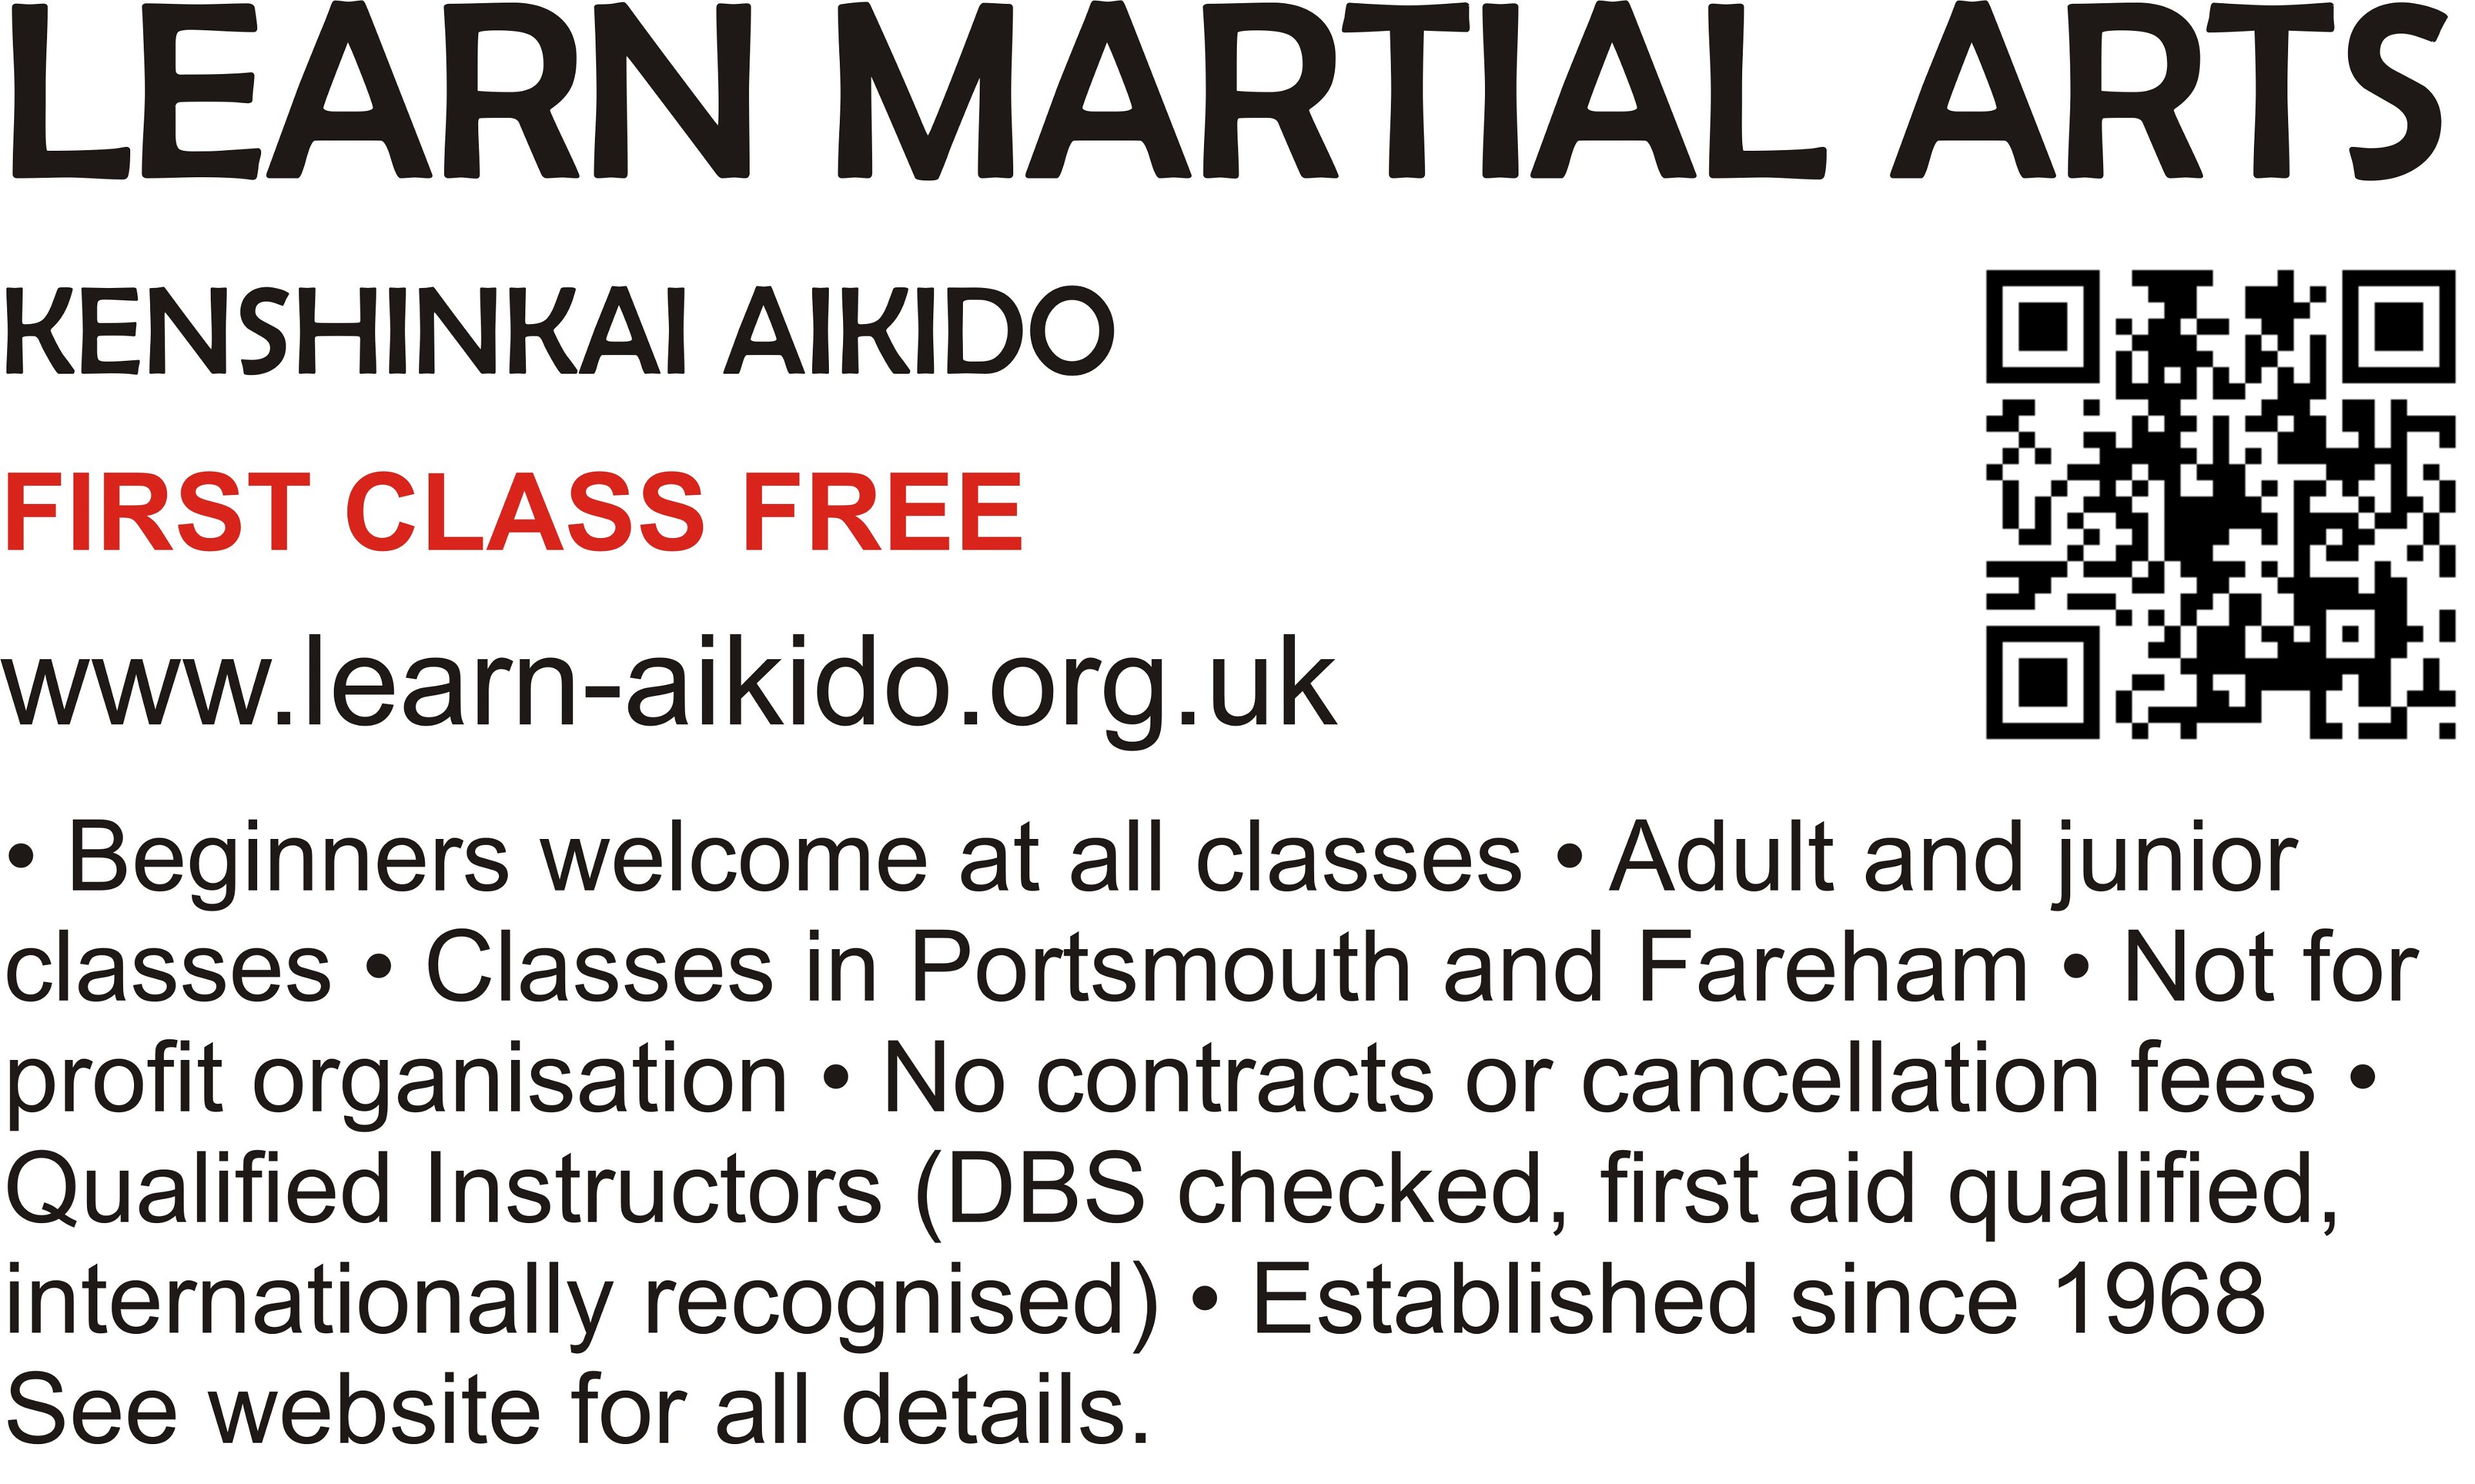 Learn Martial Arts - First Class Free